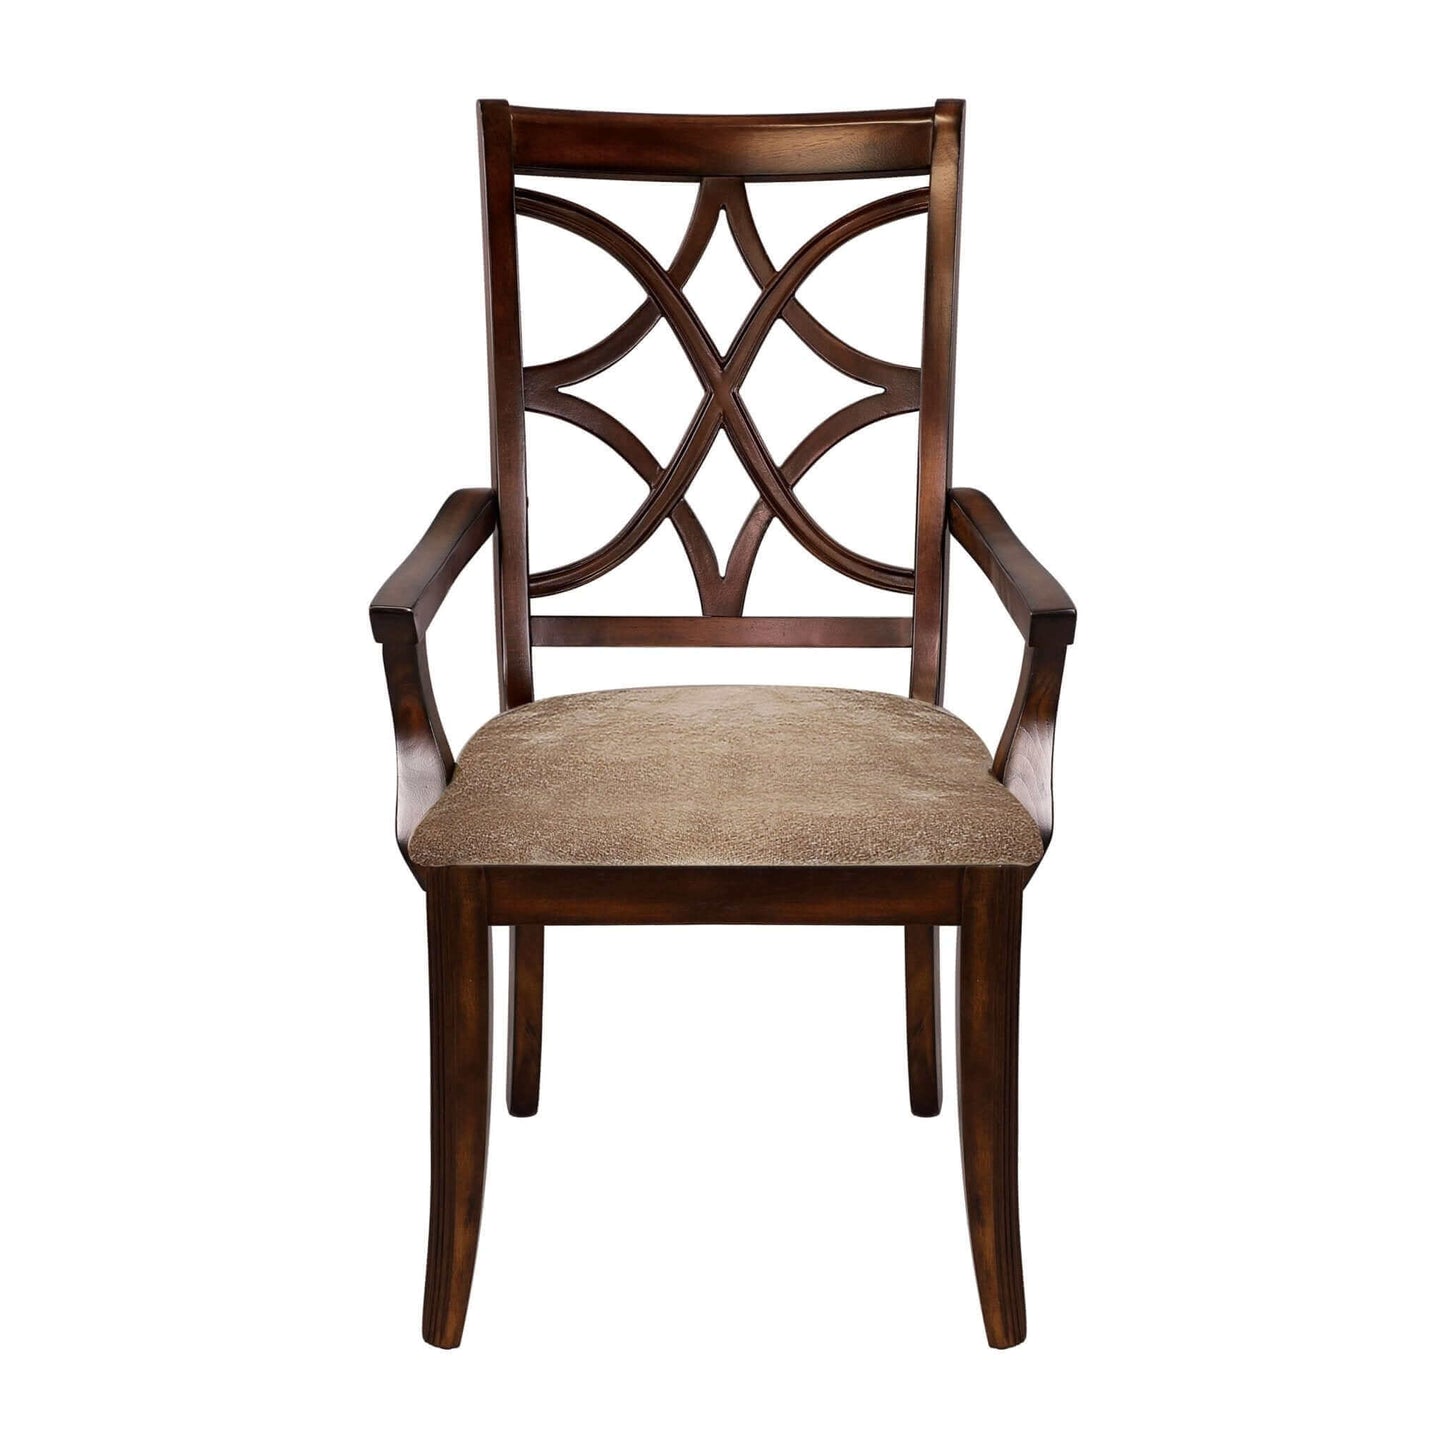 Cherry finish formal dining chair with a padded seat and elegant backrest design, part of a 7-piece dining set.